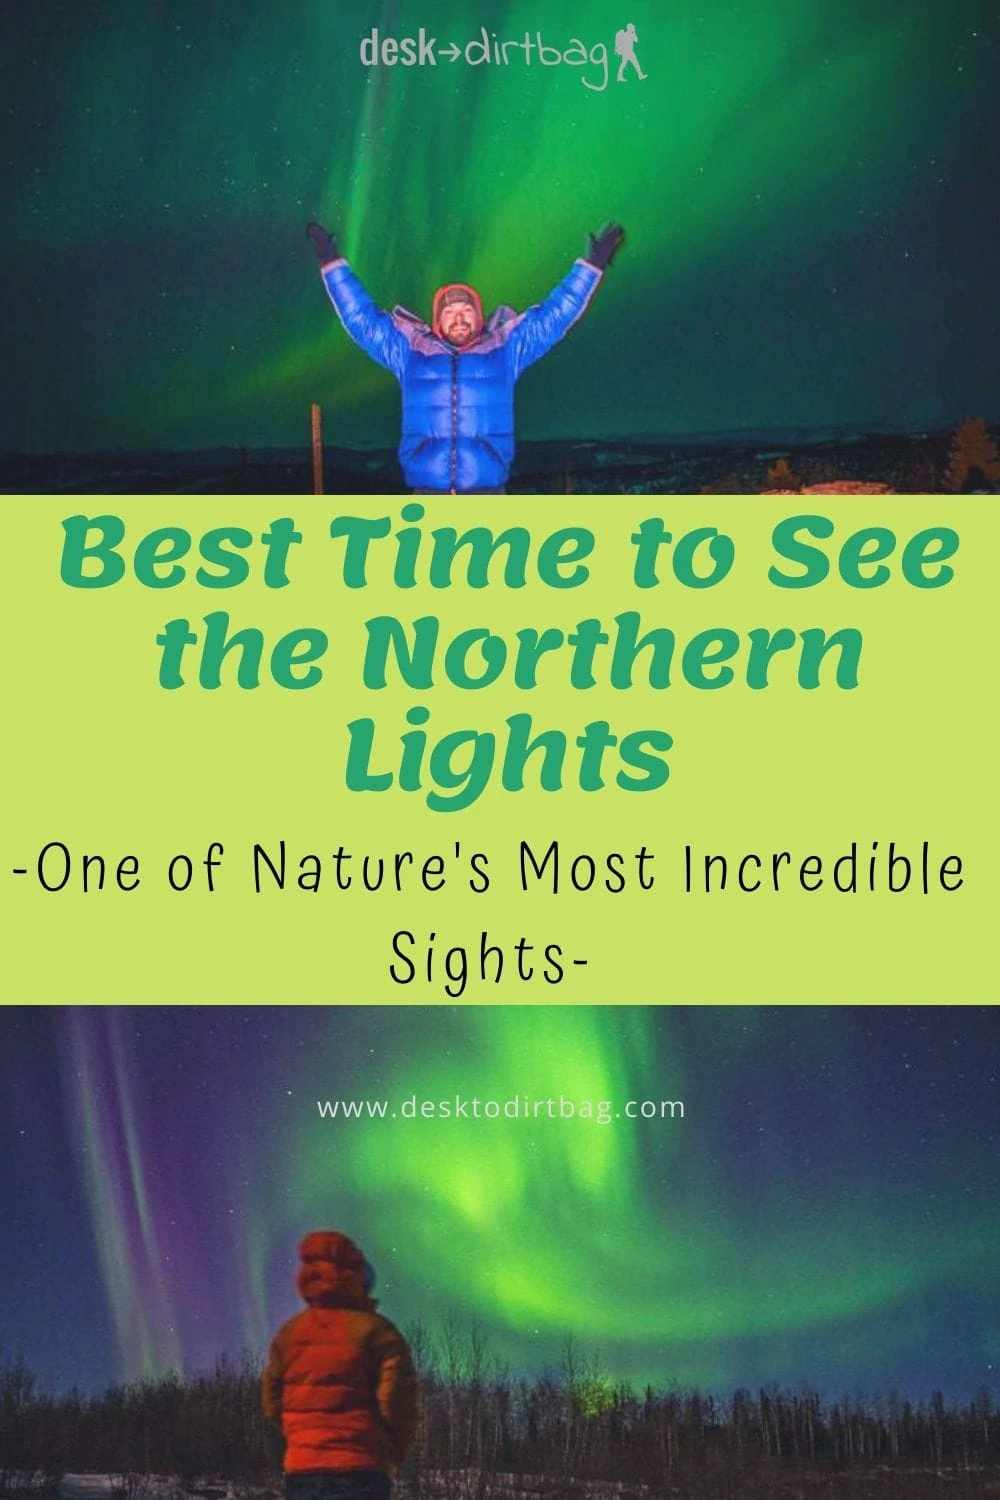 When is the Best Time to See the Northern Lights? travel, north-america, alaska